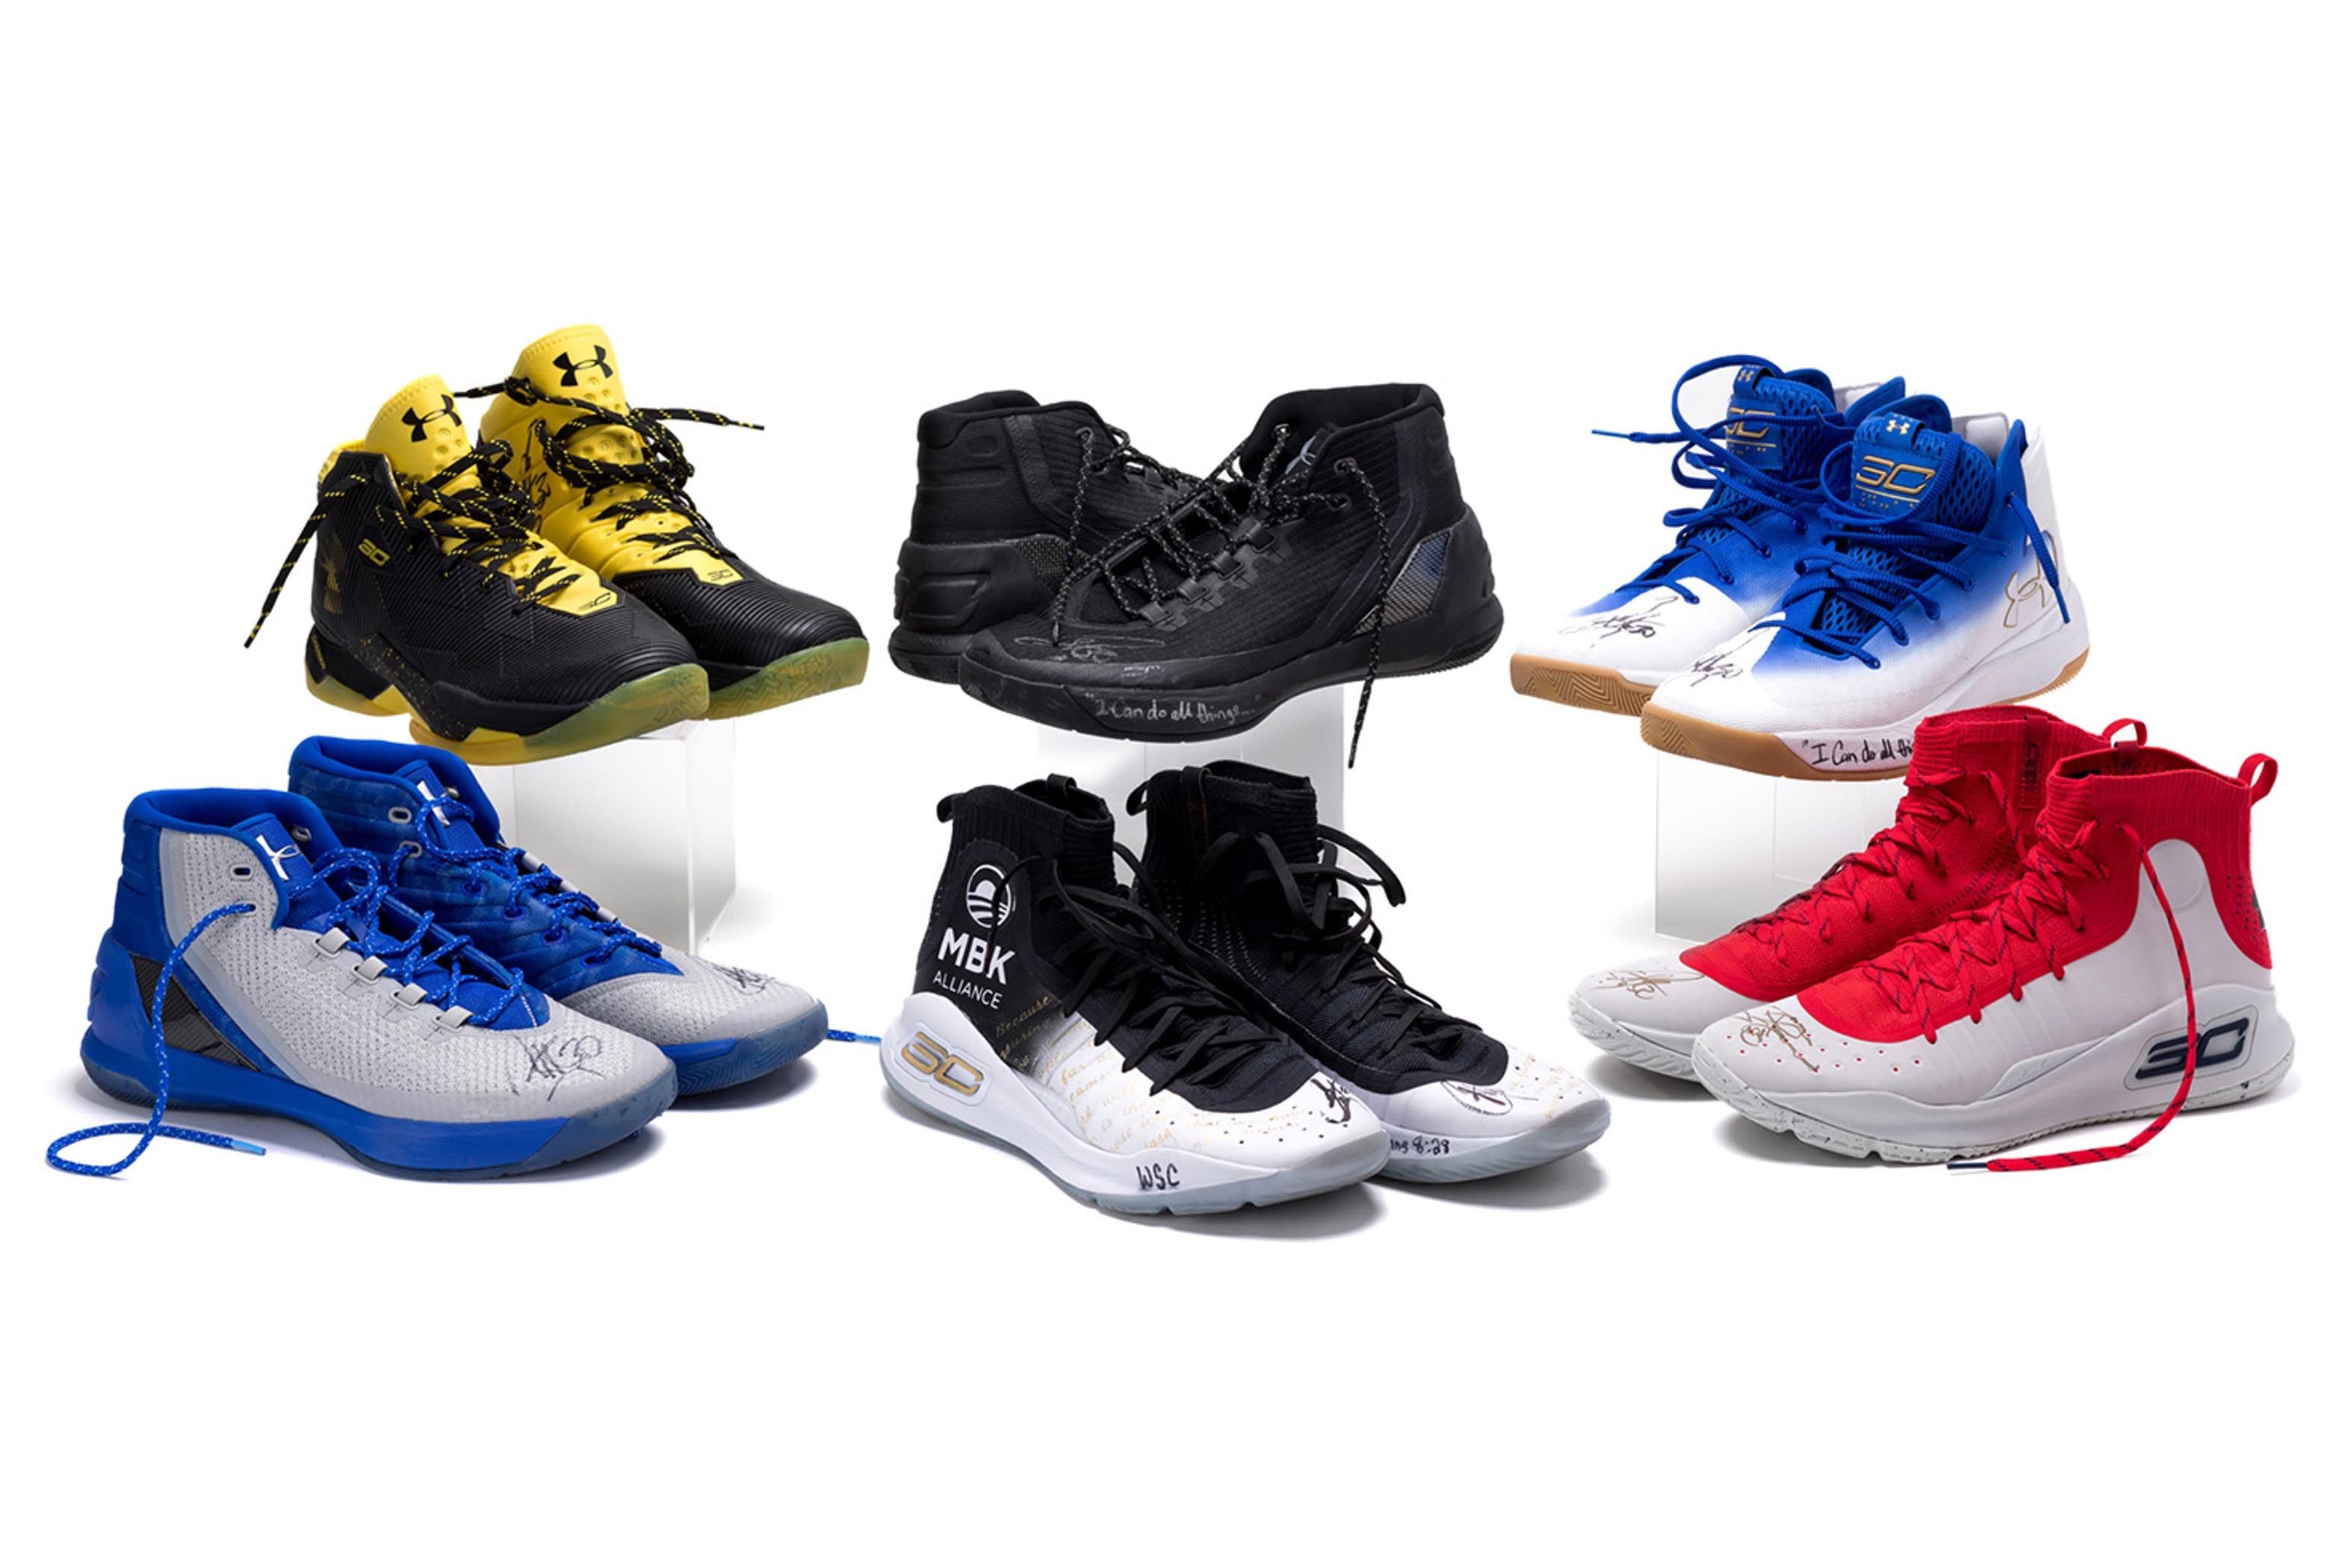 Under Armour Stockx Steph Curry Charity Campaign 1 Sneaker Freaker